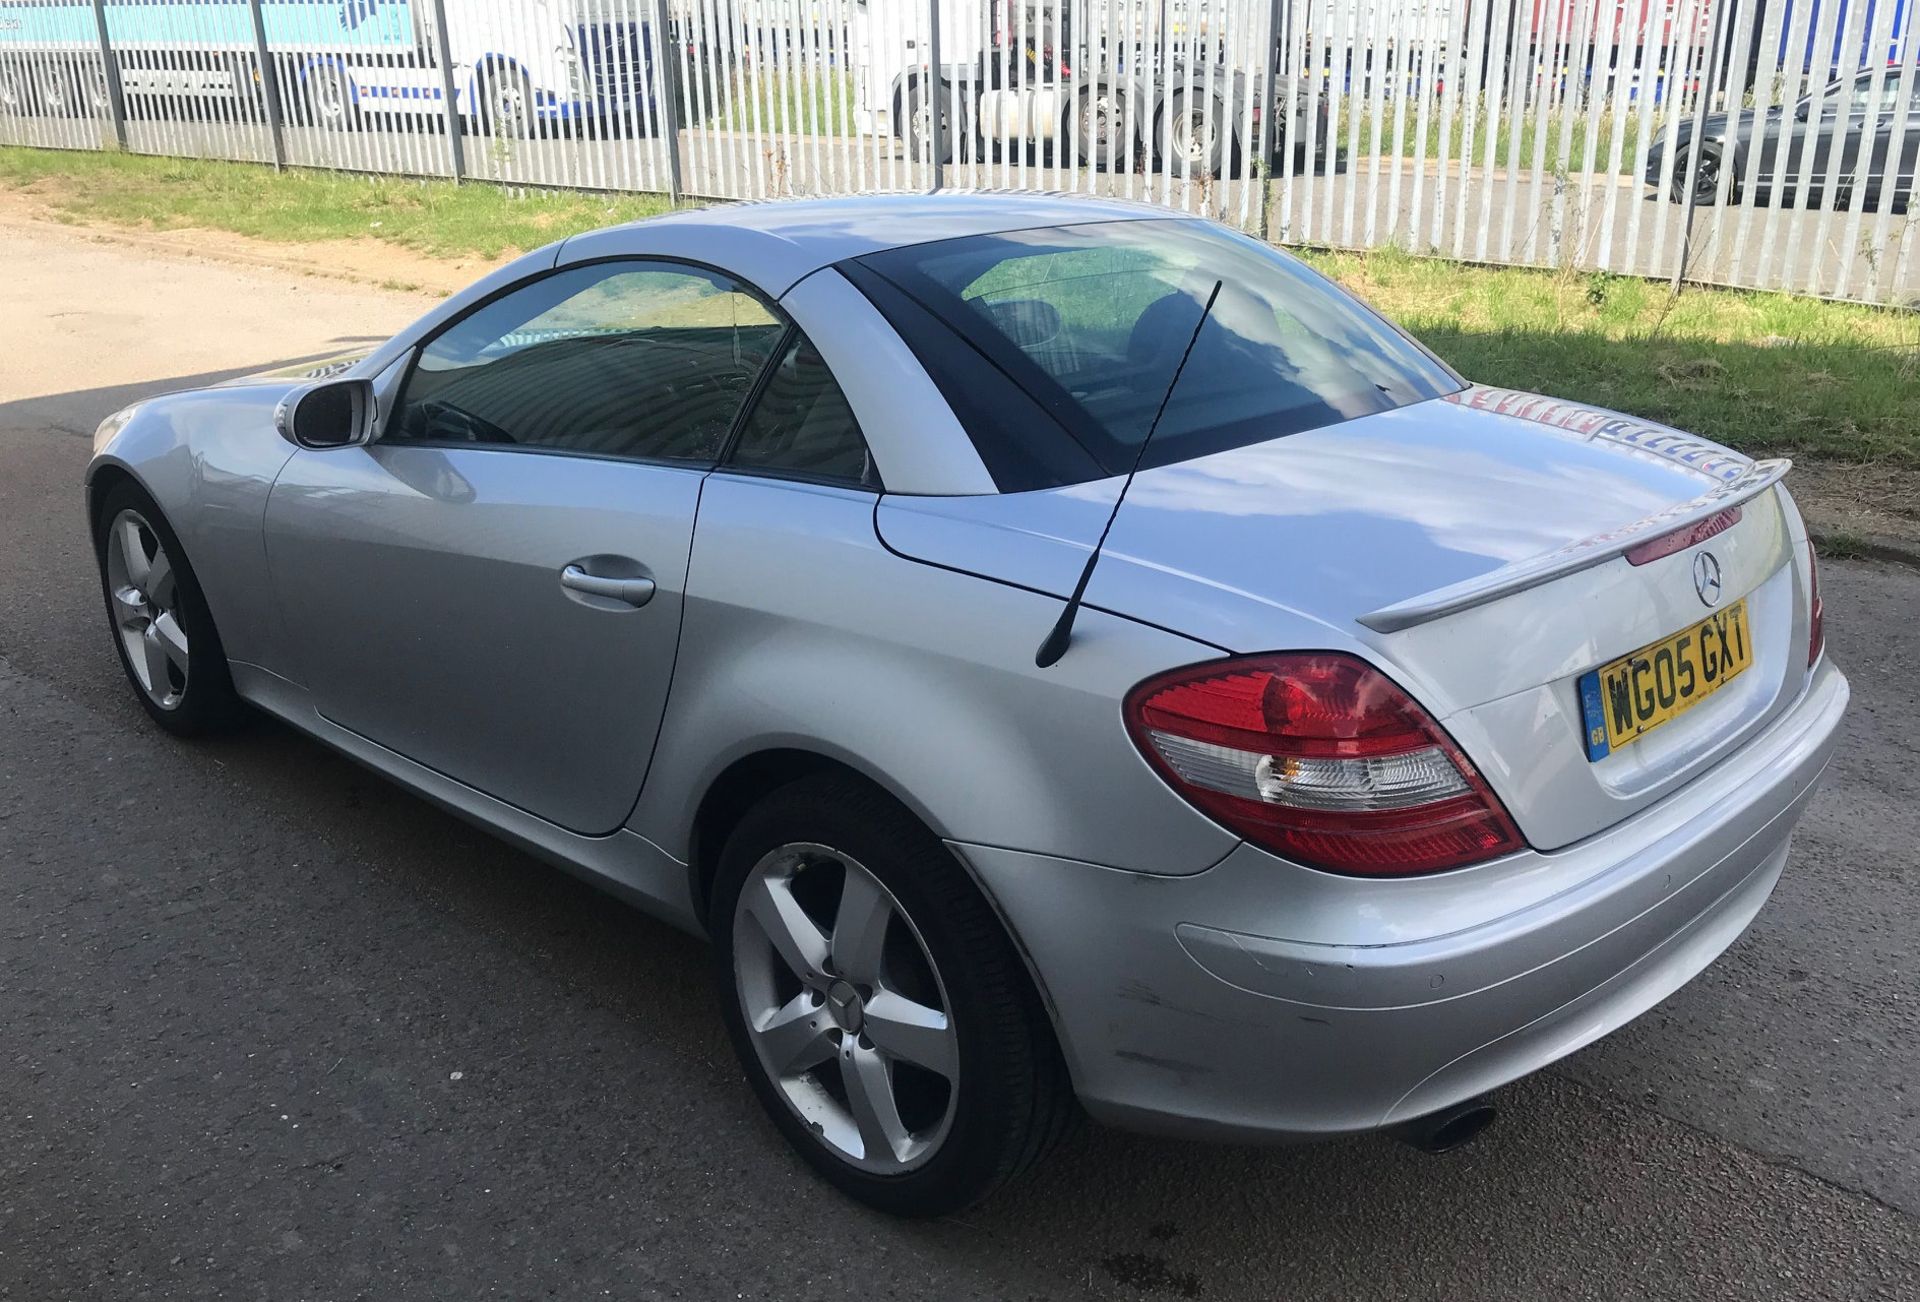 2005 Mercedes SLK 350 2 Dr Convertible - CL505 - NO VAT ON THE HAMMER - Location: Corby, N - Image 3 of 11